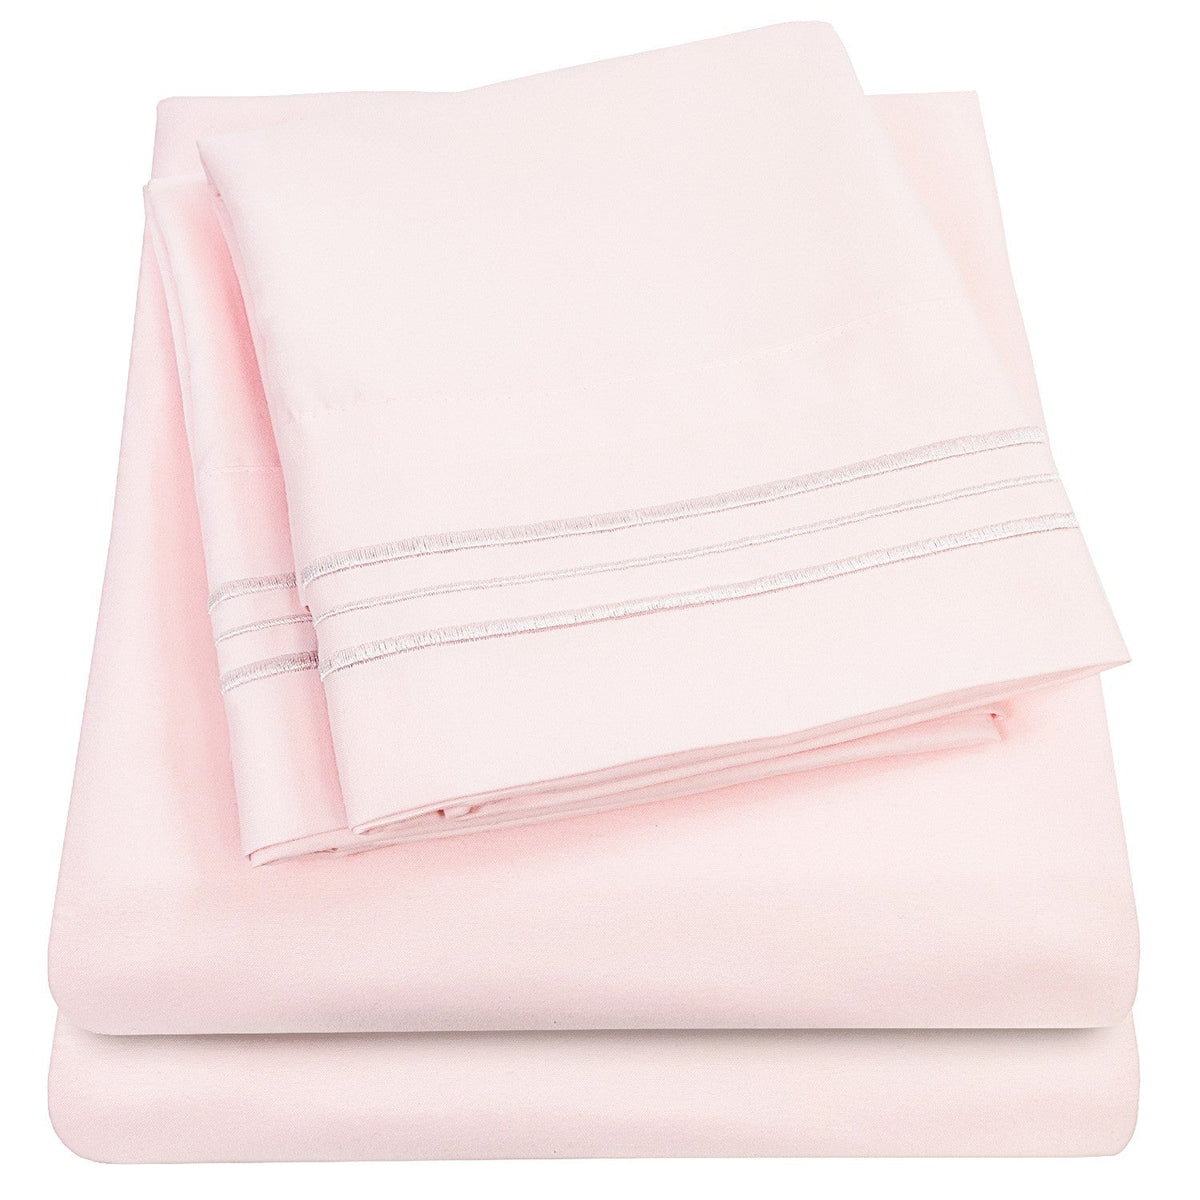 Classic 4-Piece Bed Sheet Set (Pale Pink) - Folded